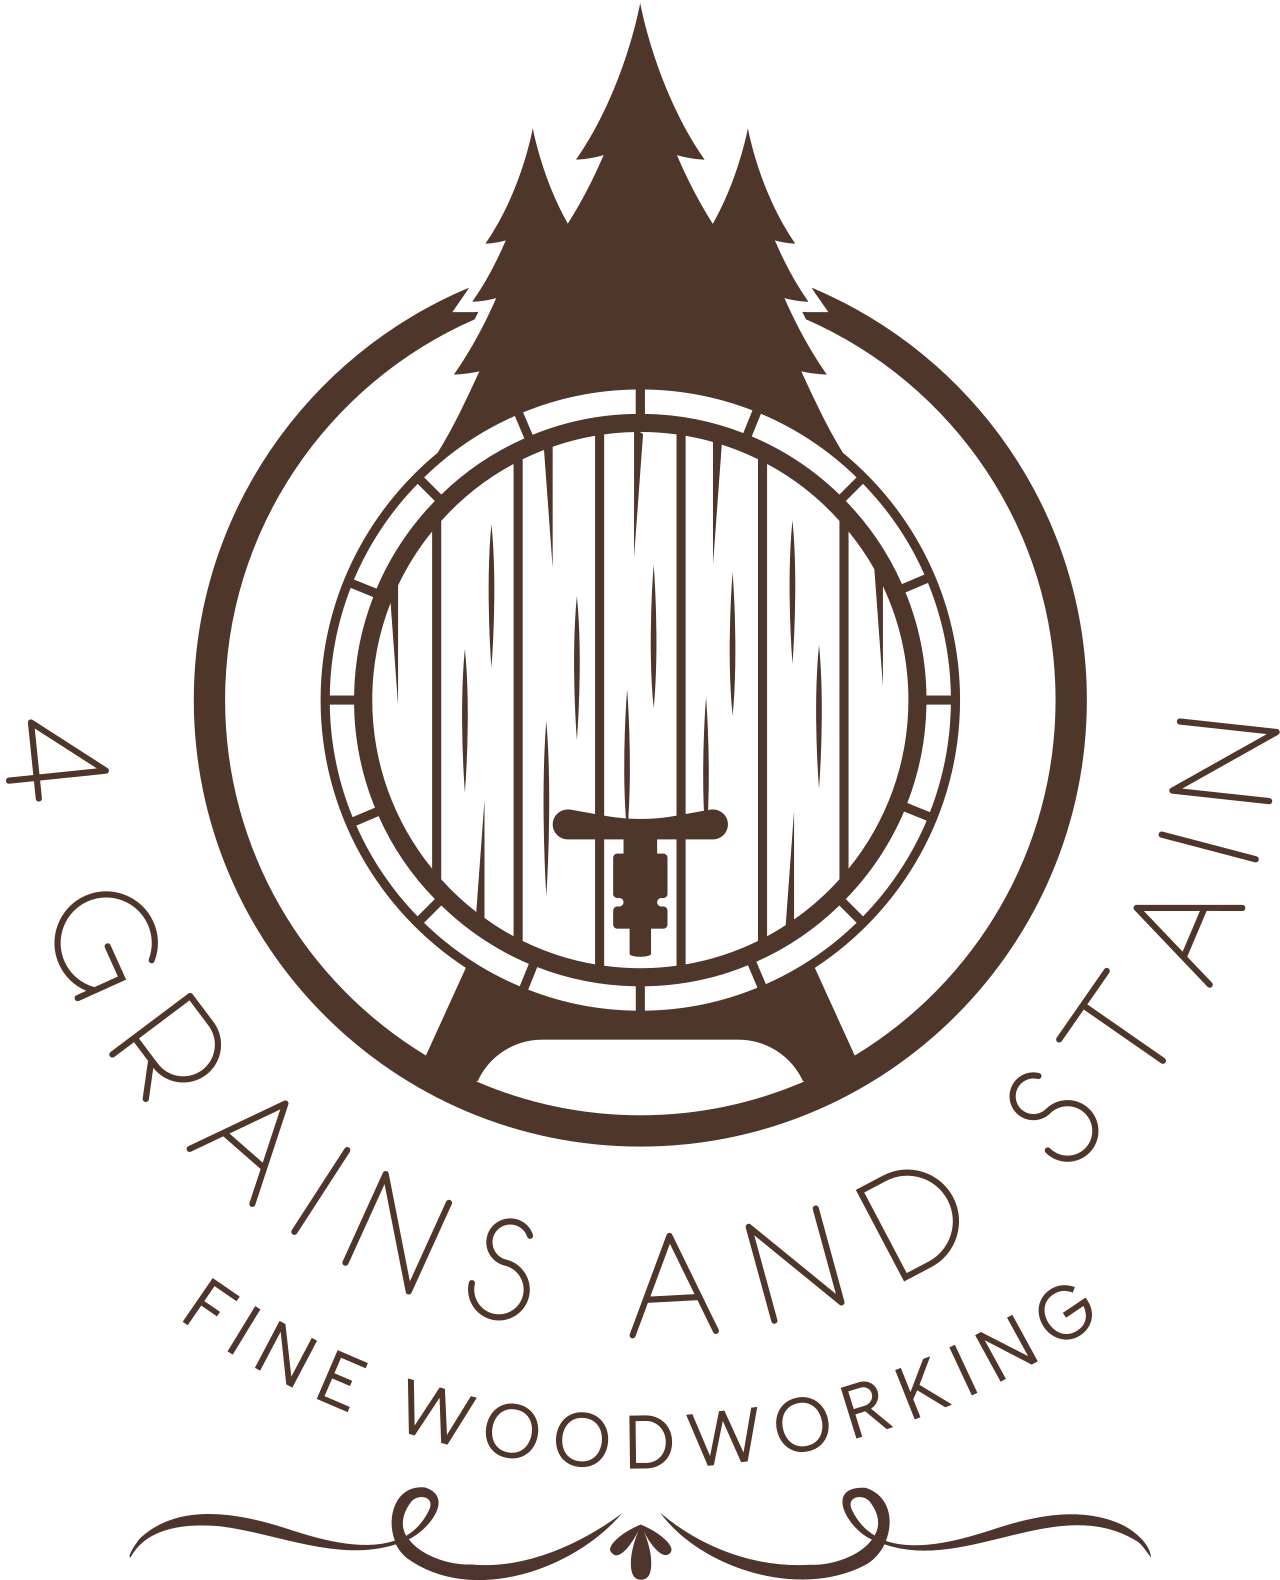 4 Grains and Stain's logo